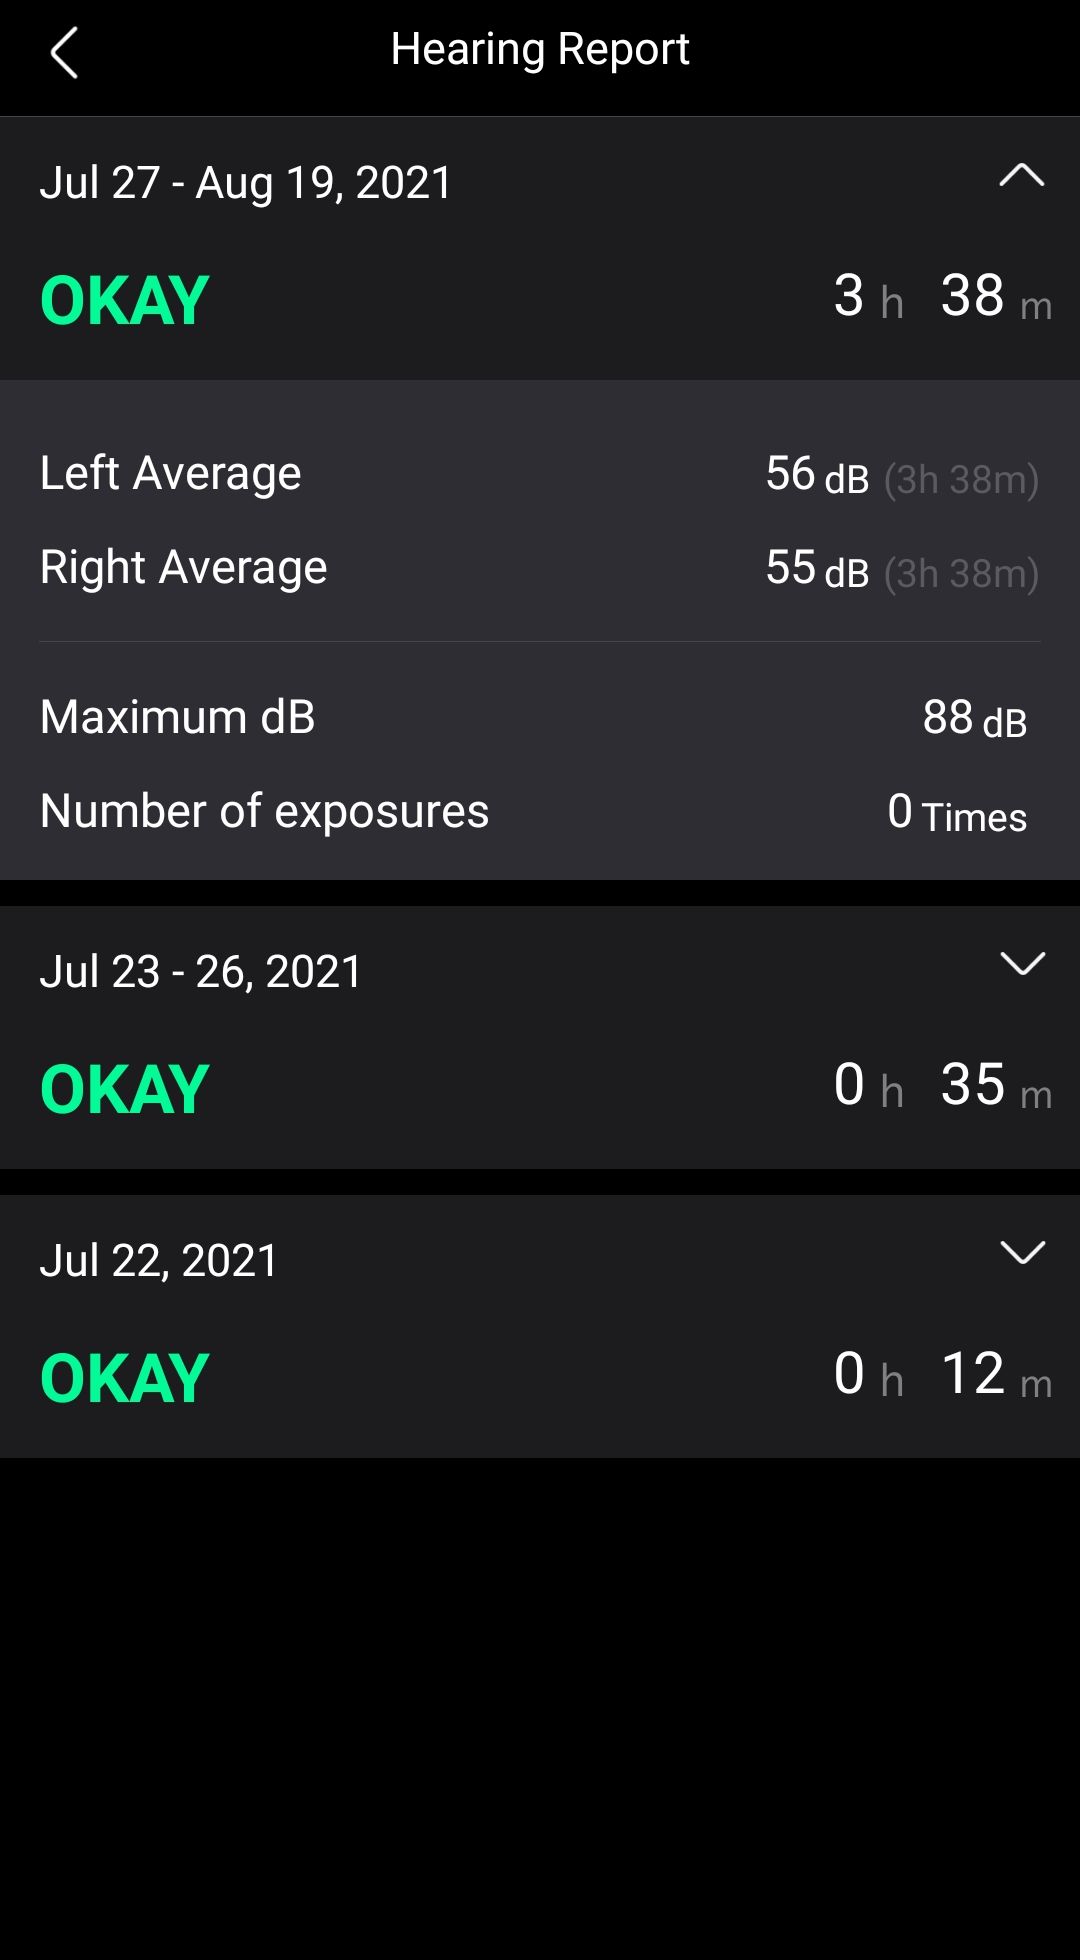 My Olive app screenshot of detailed hearing report.